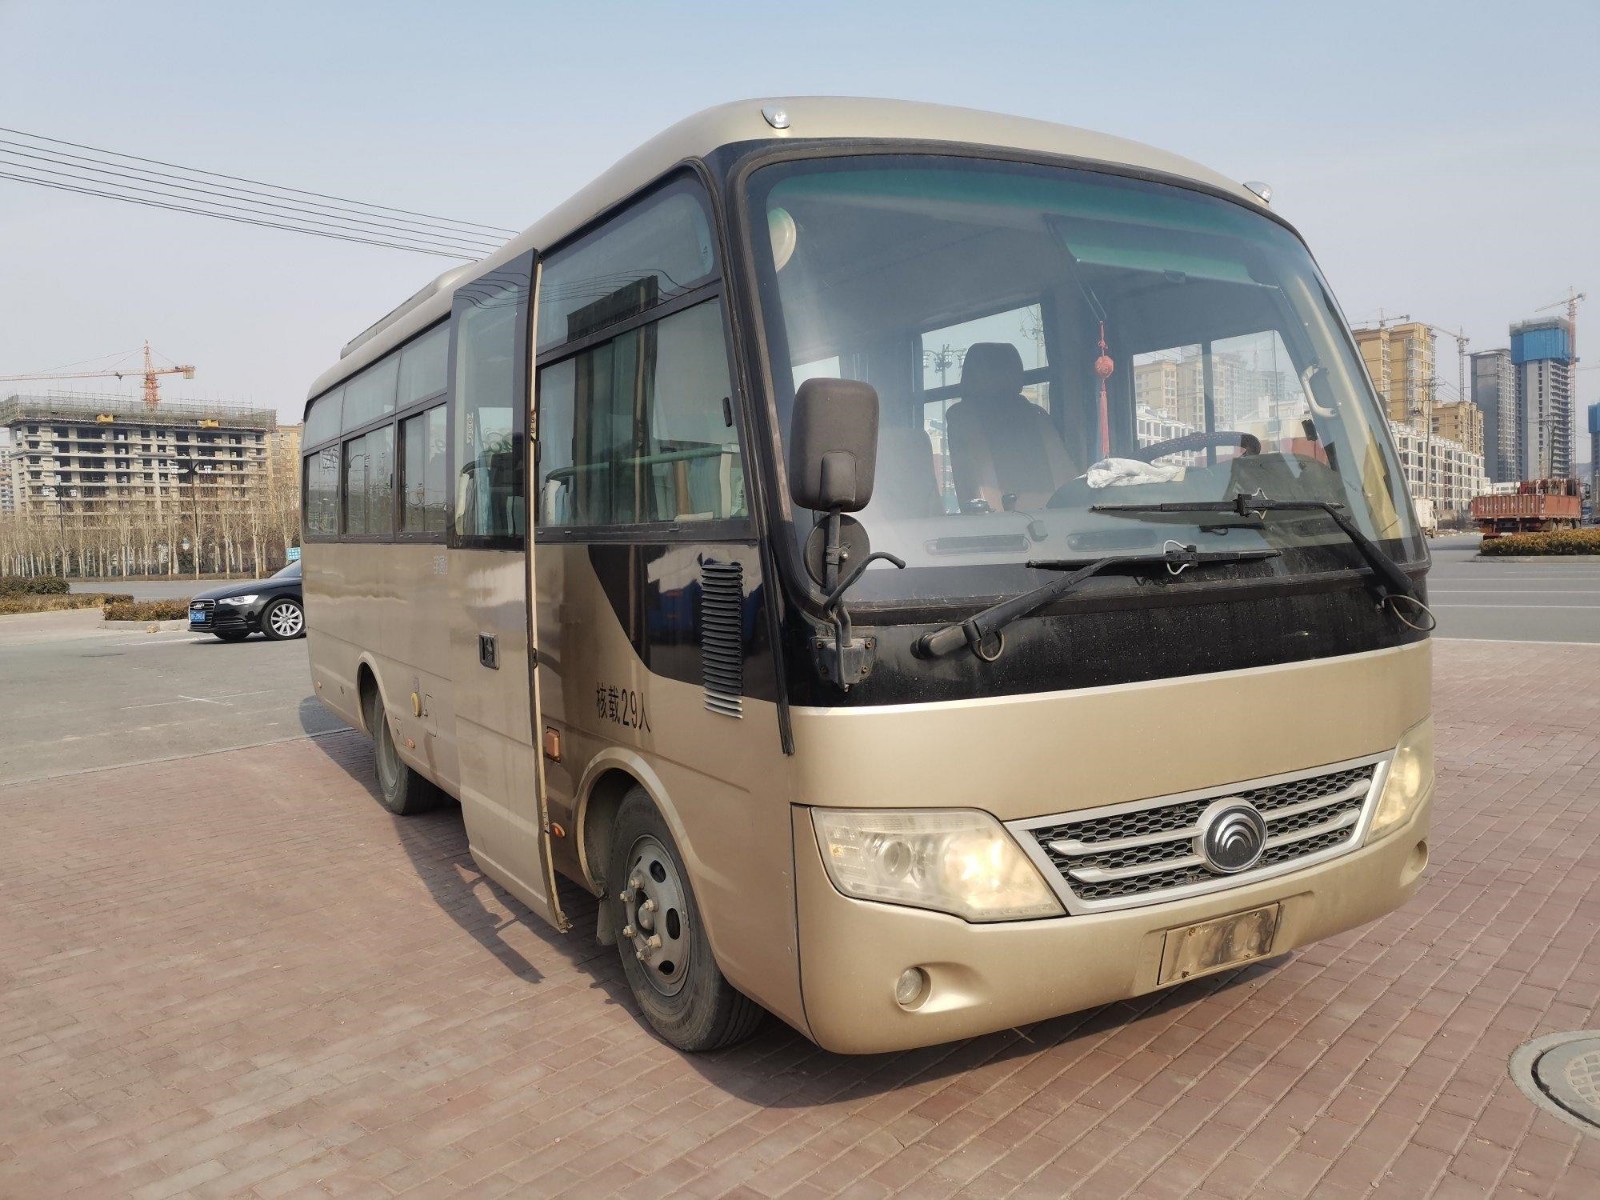 LHD Used Passenger Bus Used Yutong City Bus Used Luxury Coach Bus 